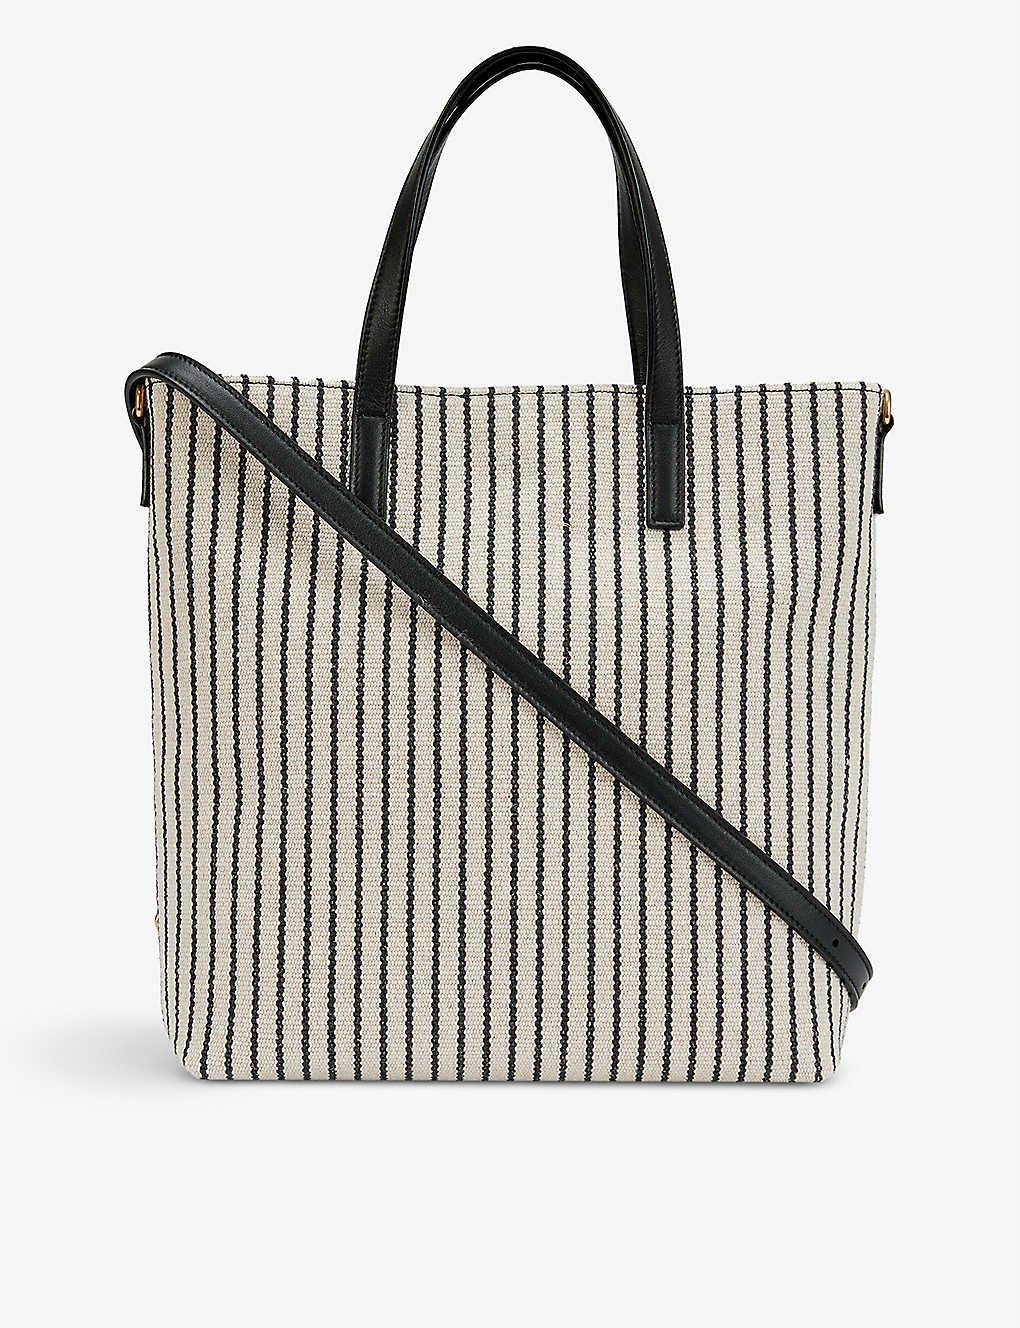 Saint Laurent Toy Woven Shopping Tote Bag in Brown